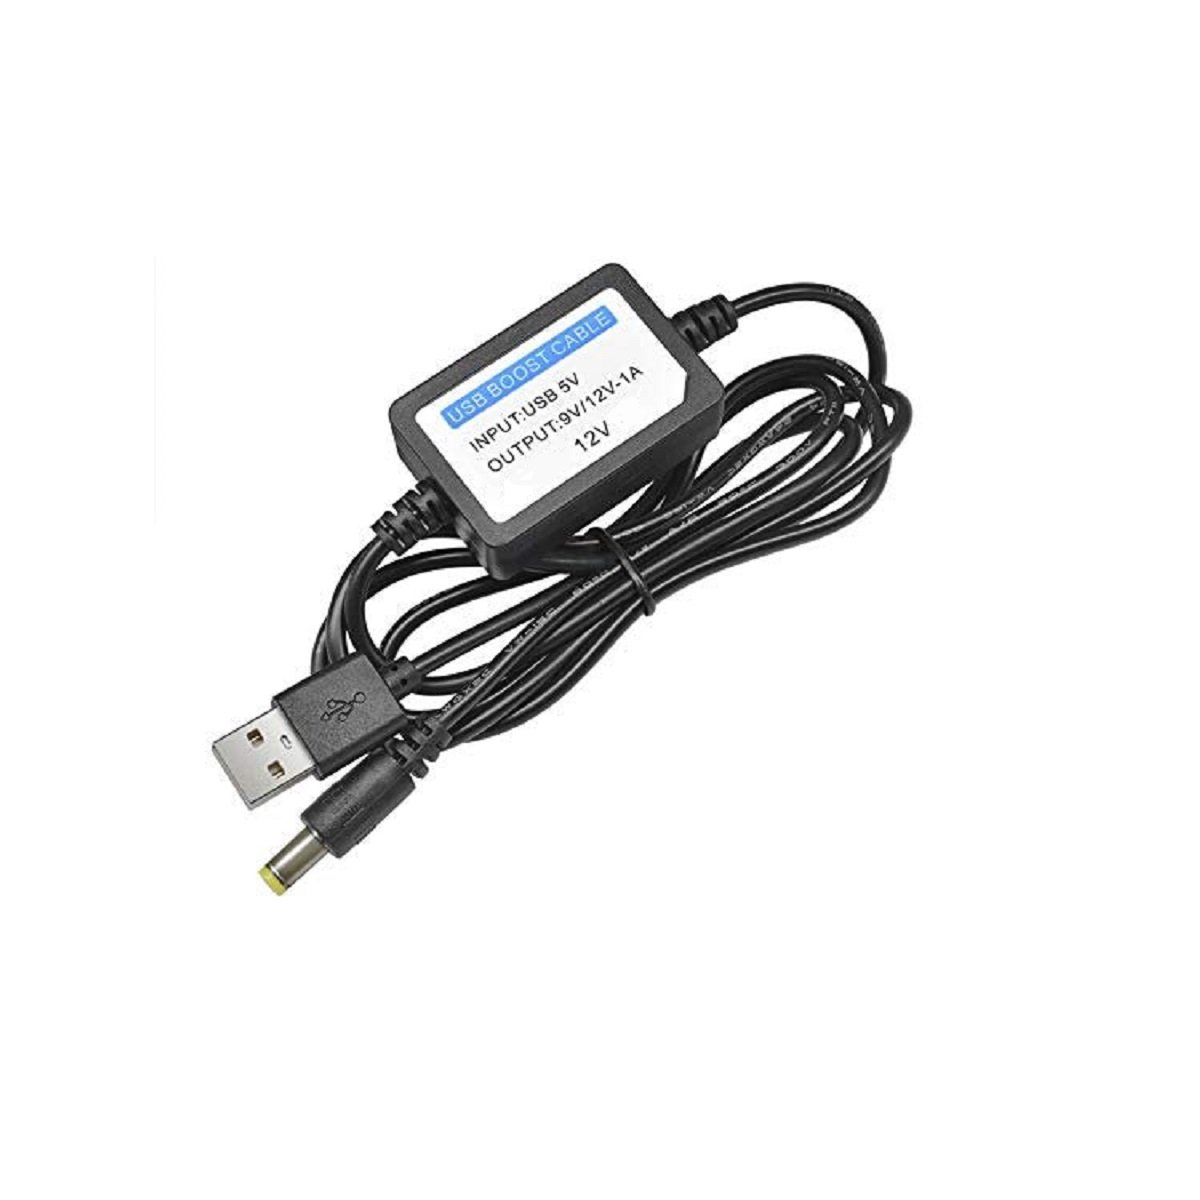 Accele USBC-5VUSBF Hardwired 2 Wire 12 Volt to USB Female 12v 1A Adapter